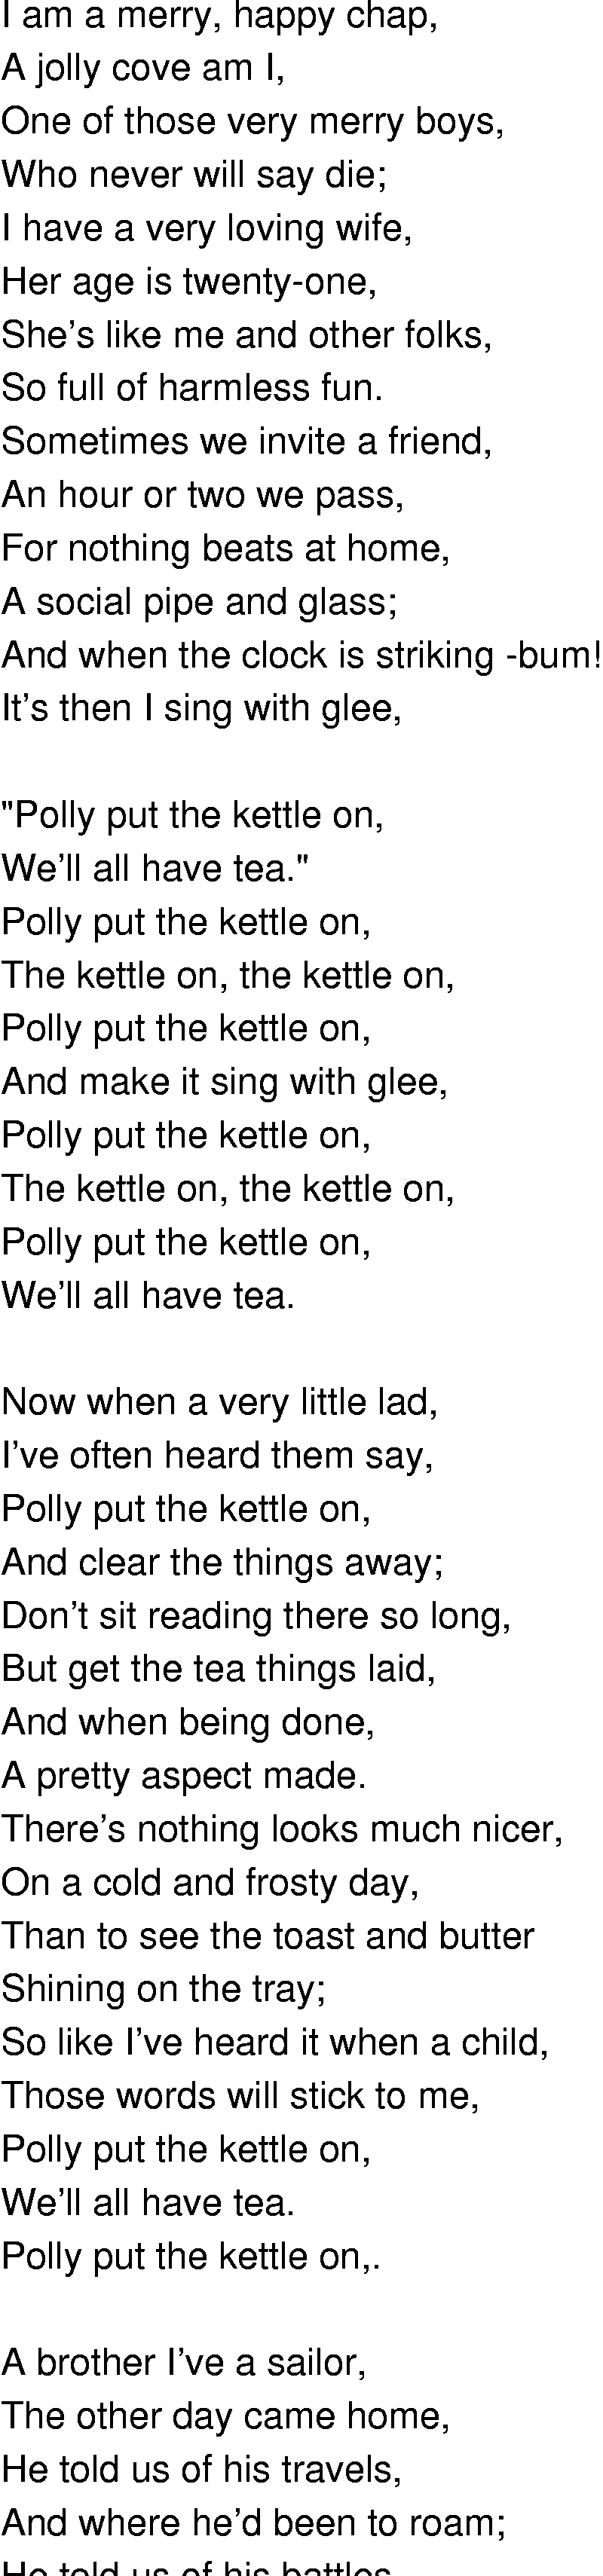 Old-Time (oldtimey) Song Lyrics - polly put the kettle on